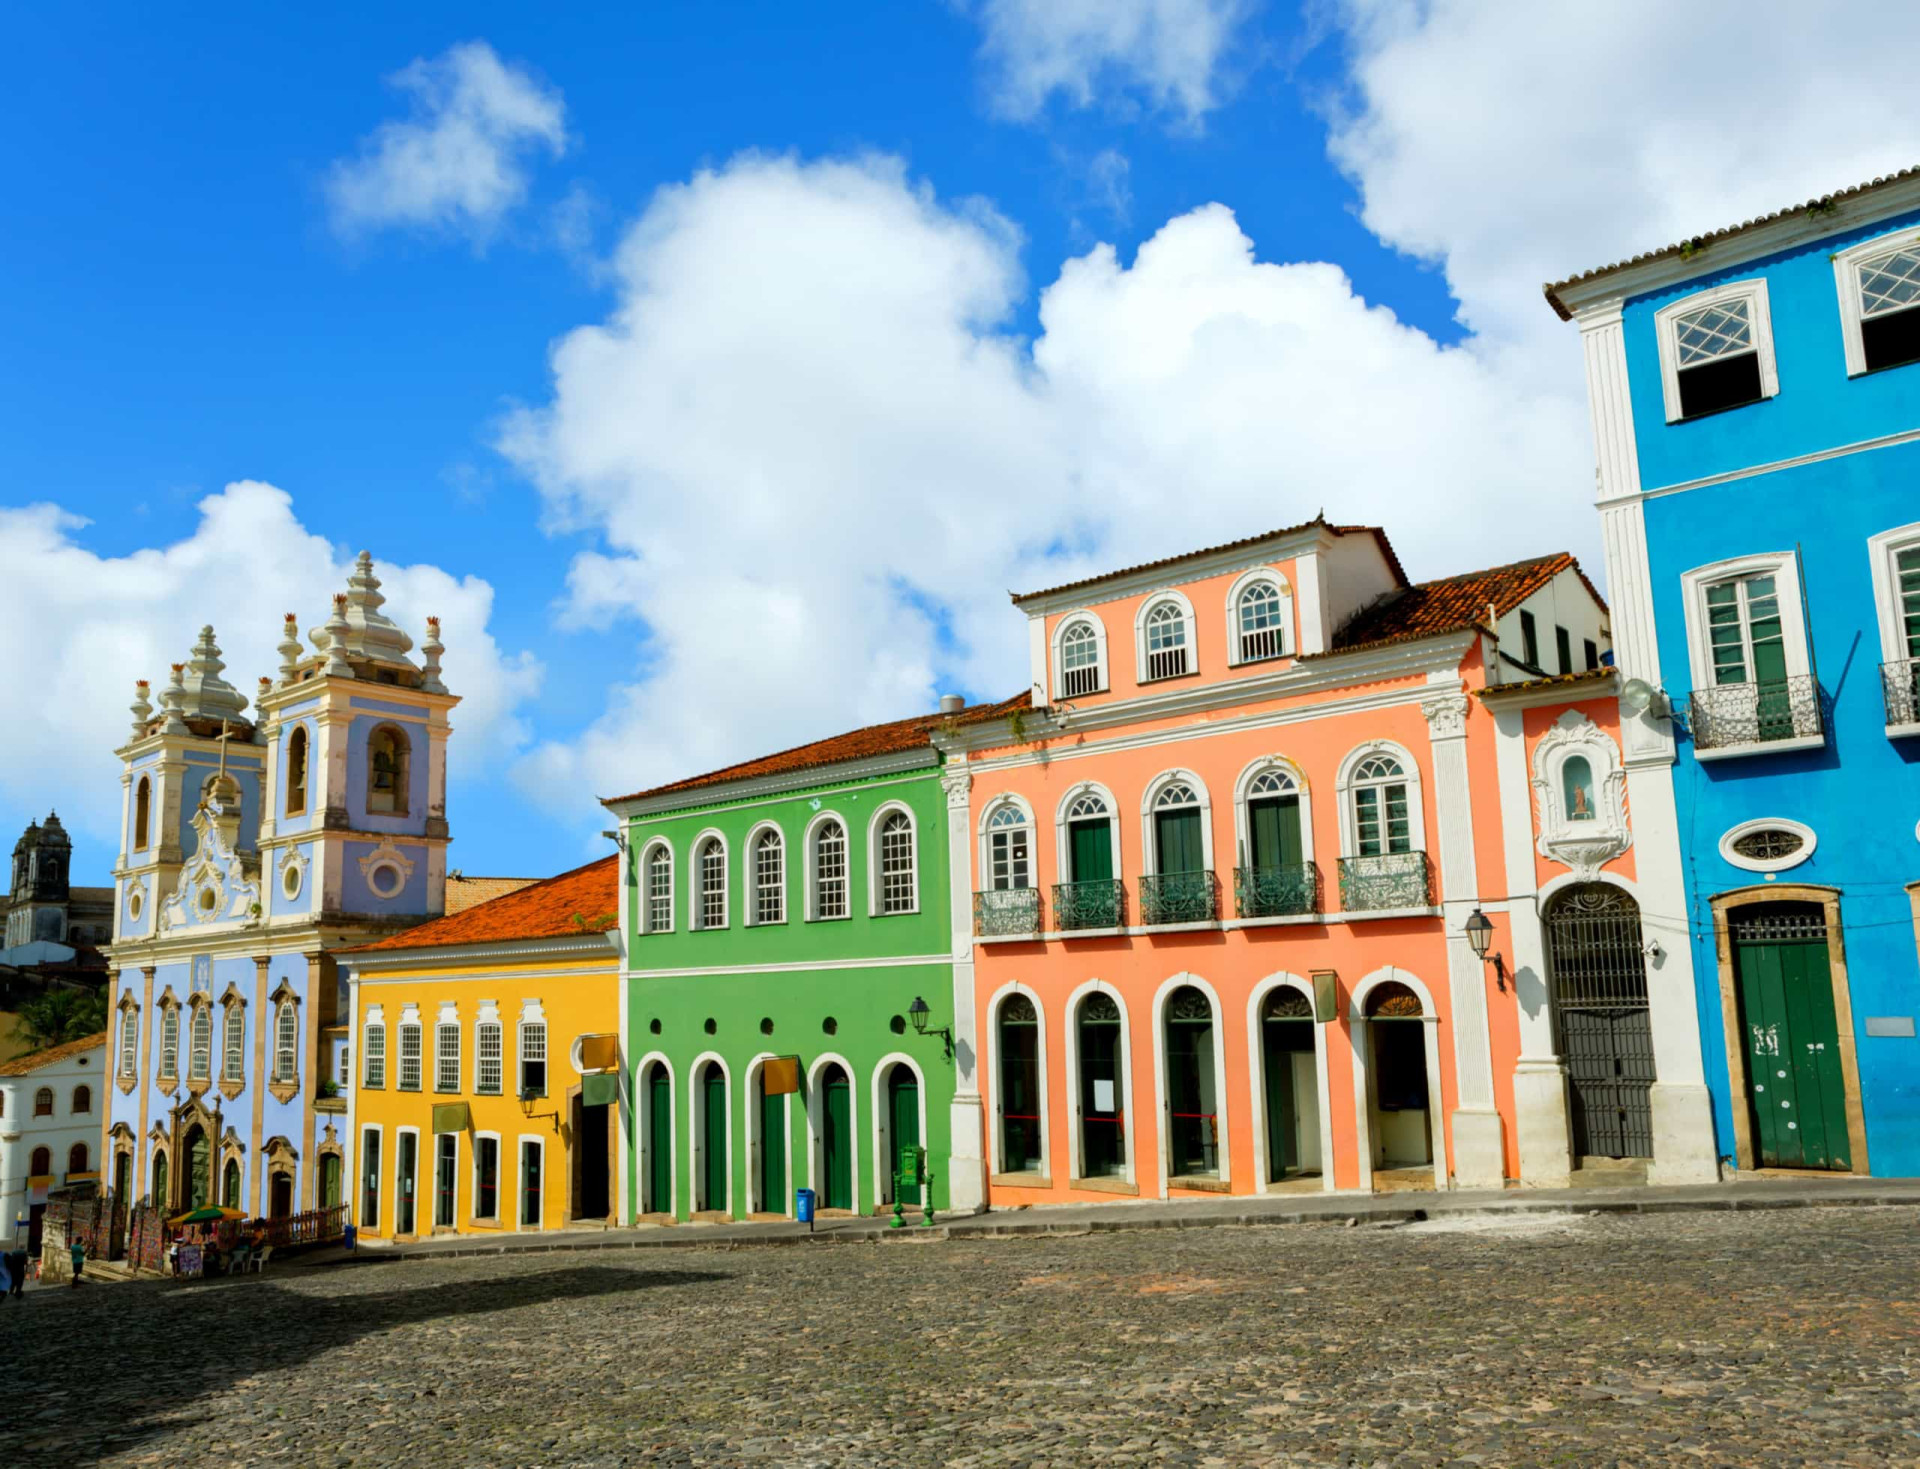 Location: Bahia state<br>Criteria: Cultural<br>Year established: 1985<br>Description: Founded by the Portuguese in 1549 as the first capital of Brazil, the colonial old town has preserved an attractive collection of brightly colored Renaissance houses from the 16th to the 18th centuries.<p><a href="https://www.msn.com/en-us/community/channel/vid-7xx8mnucu55yw63we9va2gwr7uihbxwc68fxqp25x6tg4ftibpra?cvid=94631541bc0f4f89bfd59158d696ad7e">Follow us and access great exclusive content every day</a></p>